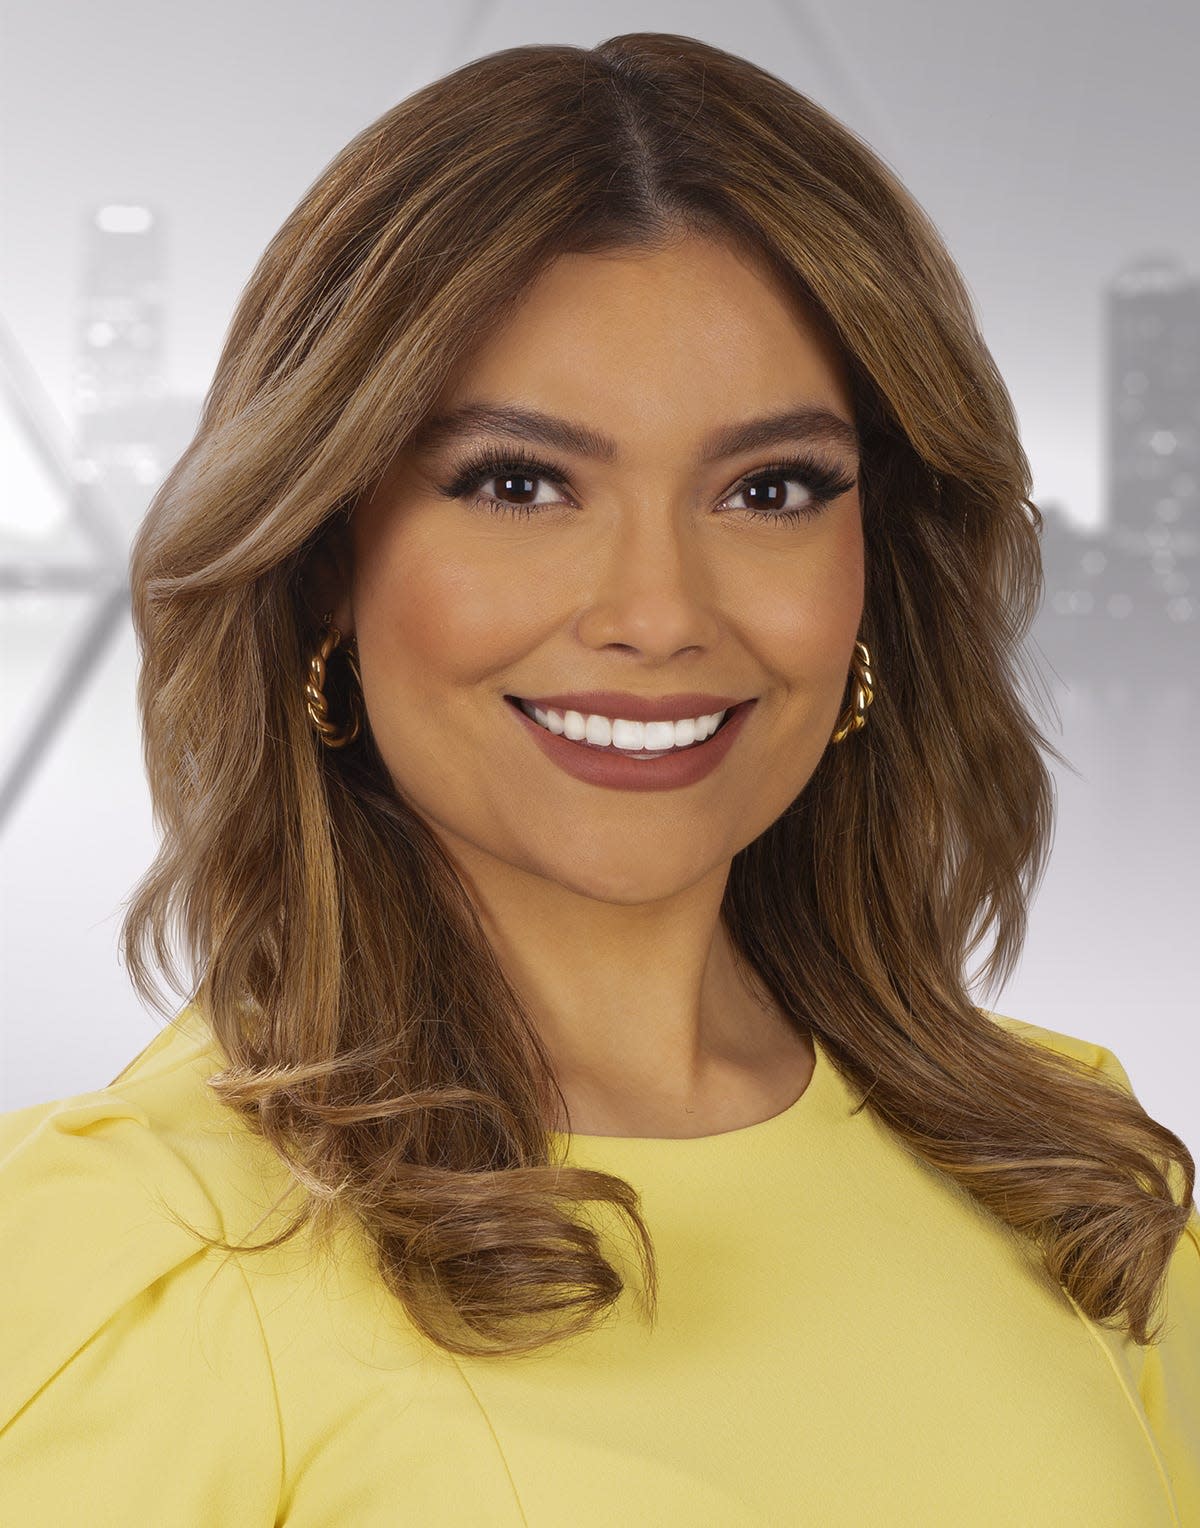 Diana Gutiérrez has been named co-anchor of the 10 p.m. newscast at WISN-TV (Channel 12) in Milwaukee.